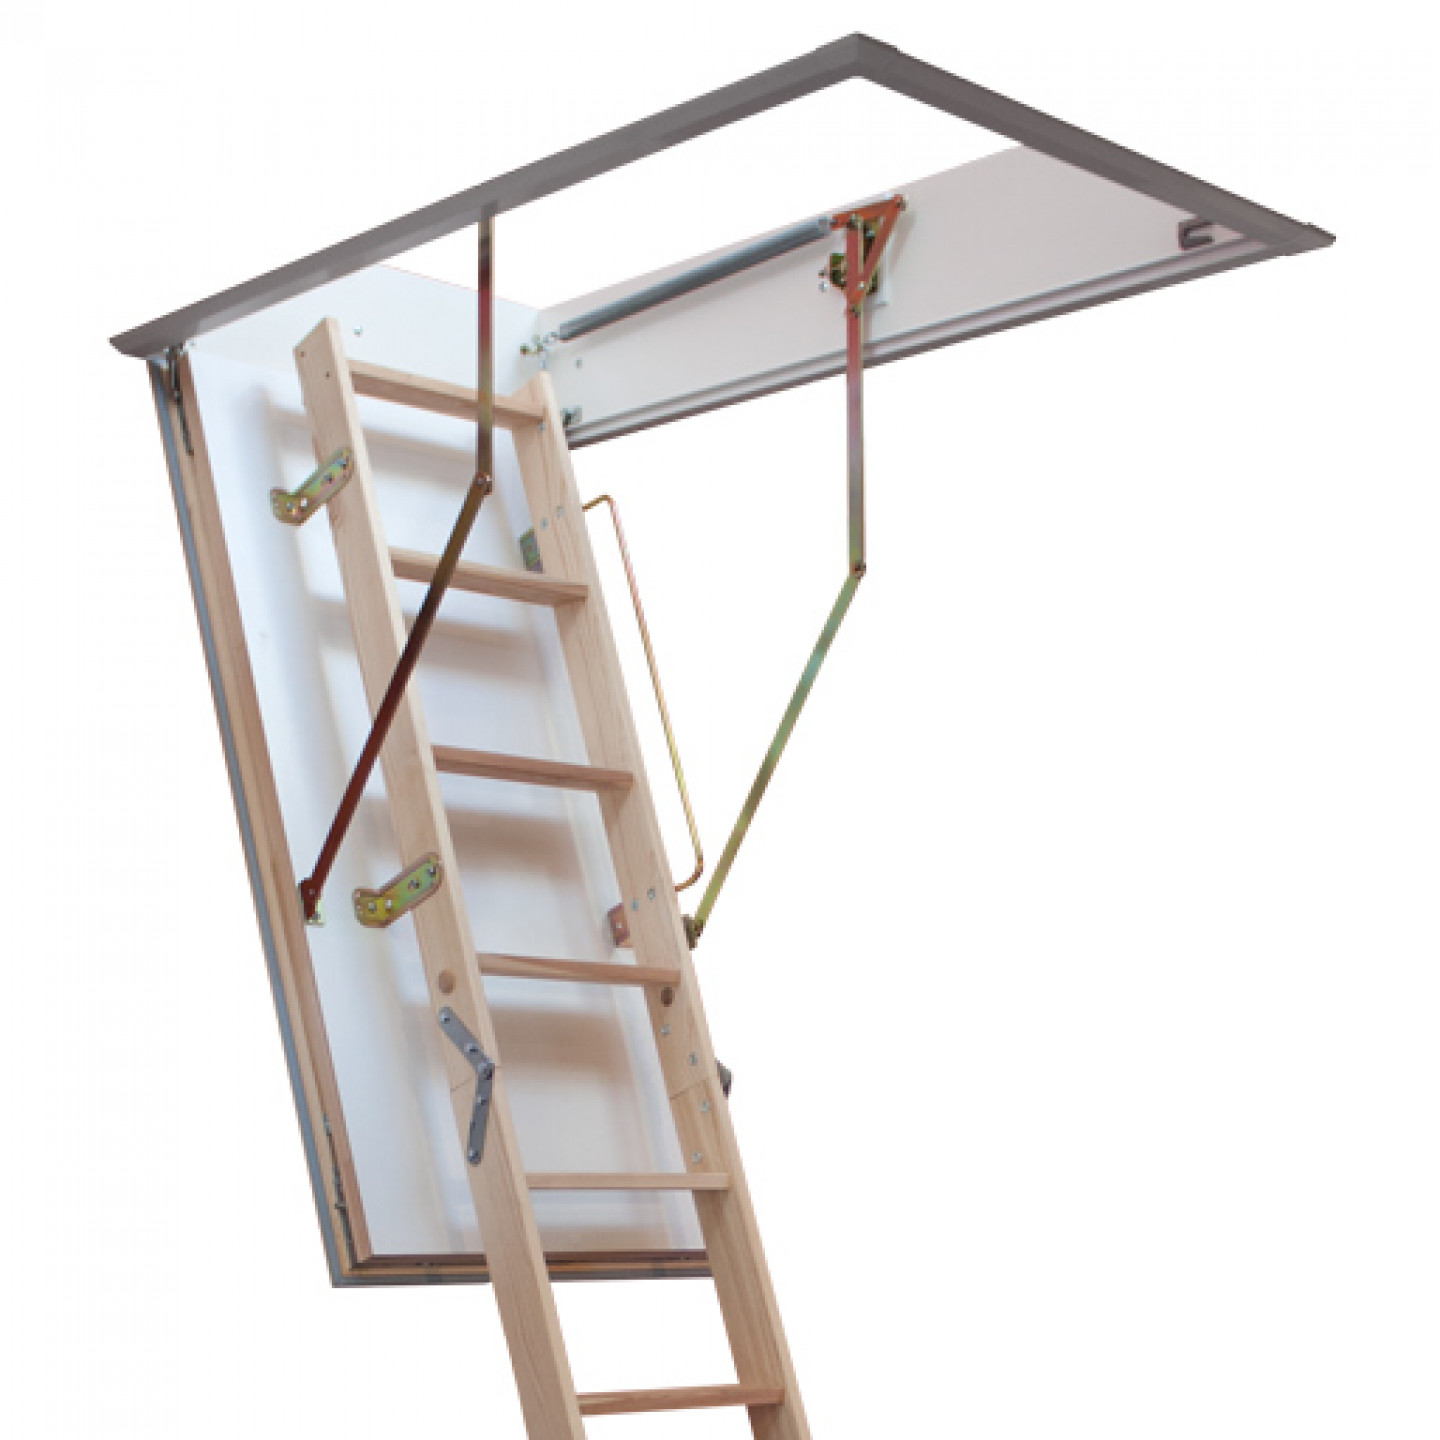 What are the advantages of putting up a Loft Ladder?